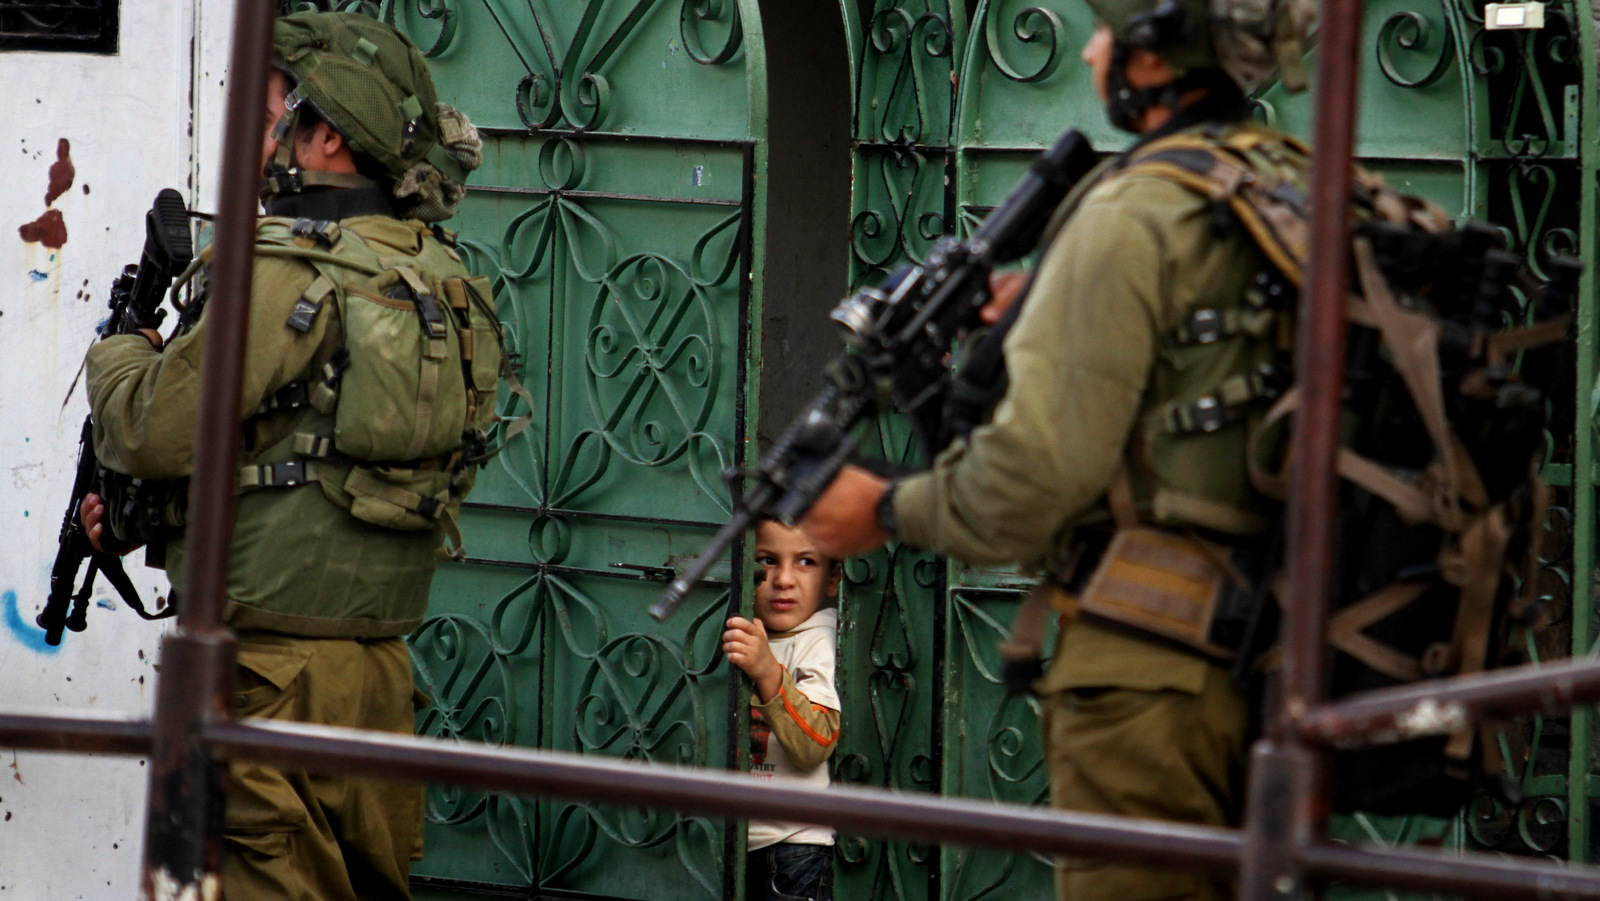 A Palestinian child looks at Israeli soldiers patrolling in the West Bank city of Hebron, Monday, Sept. 23, 2013. (AP/Nasser Shiyoukhi)